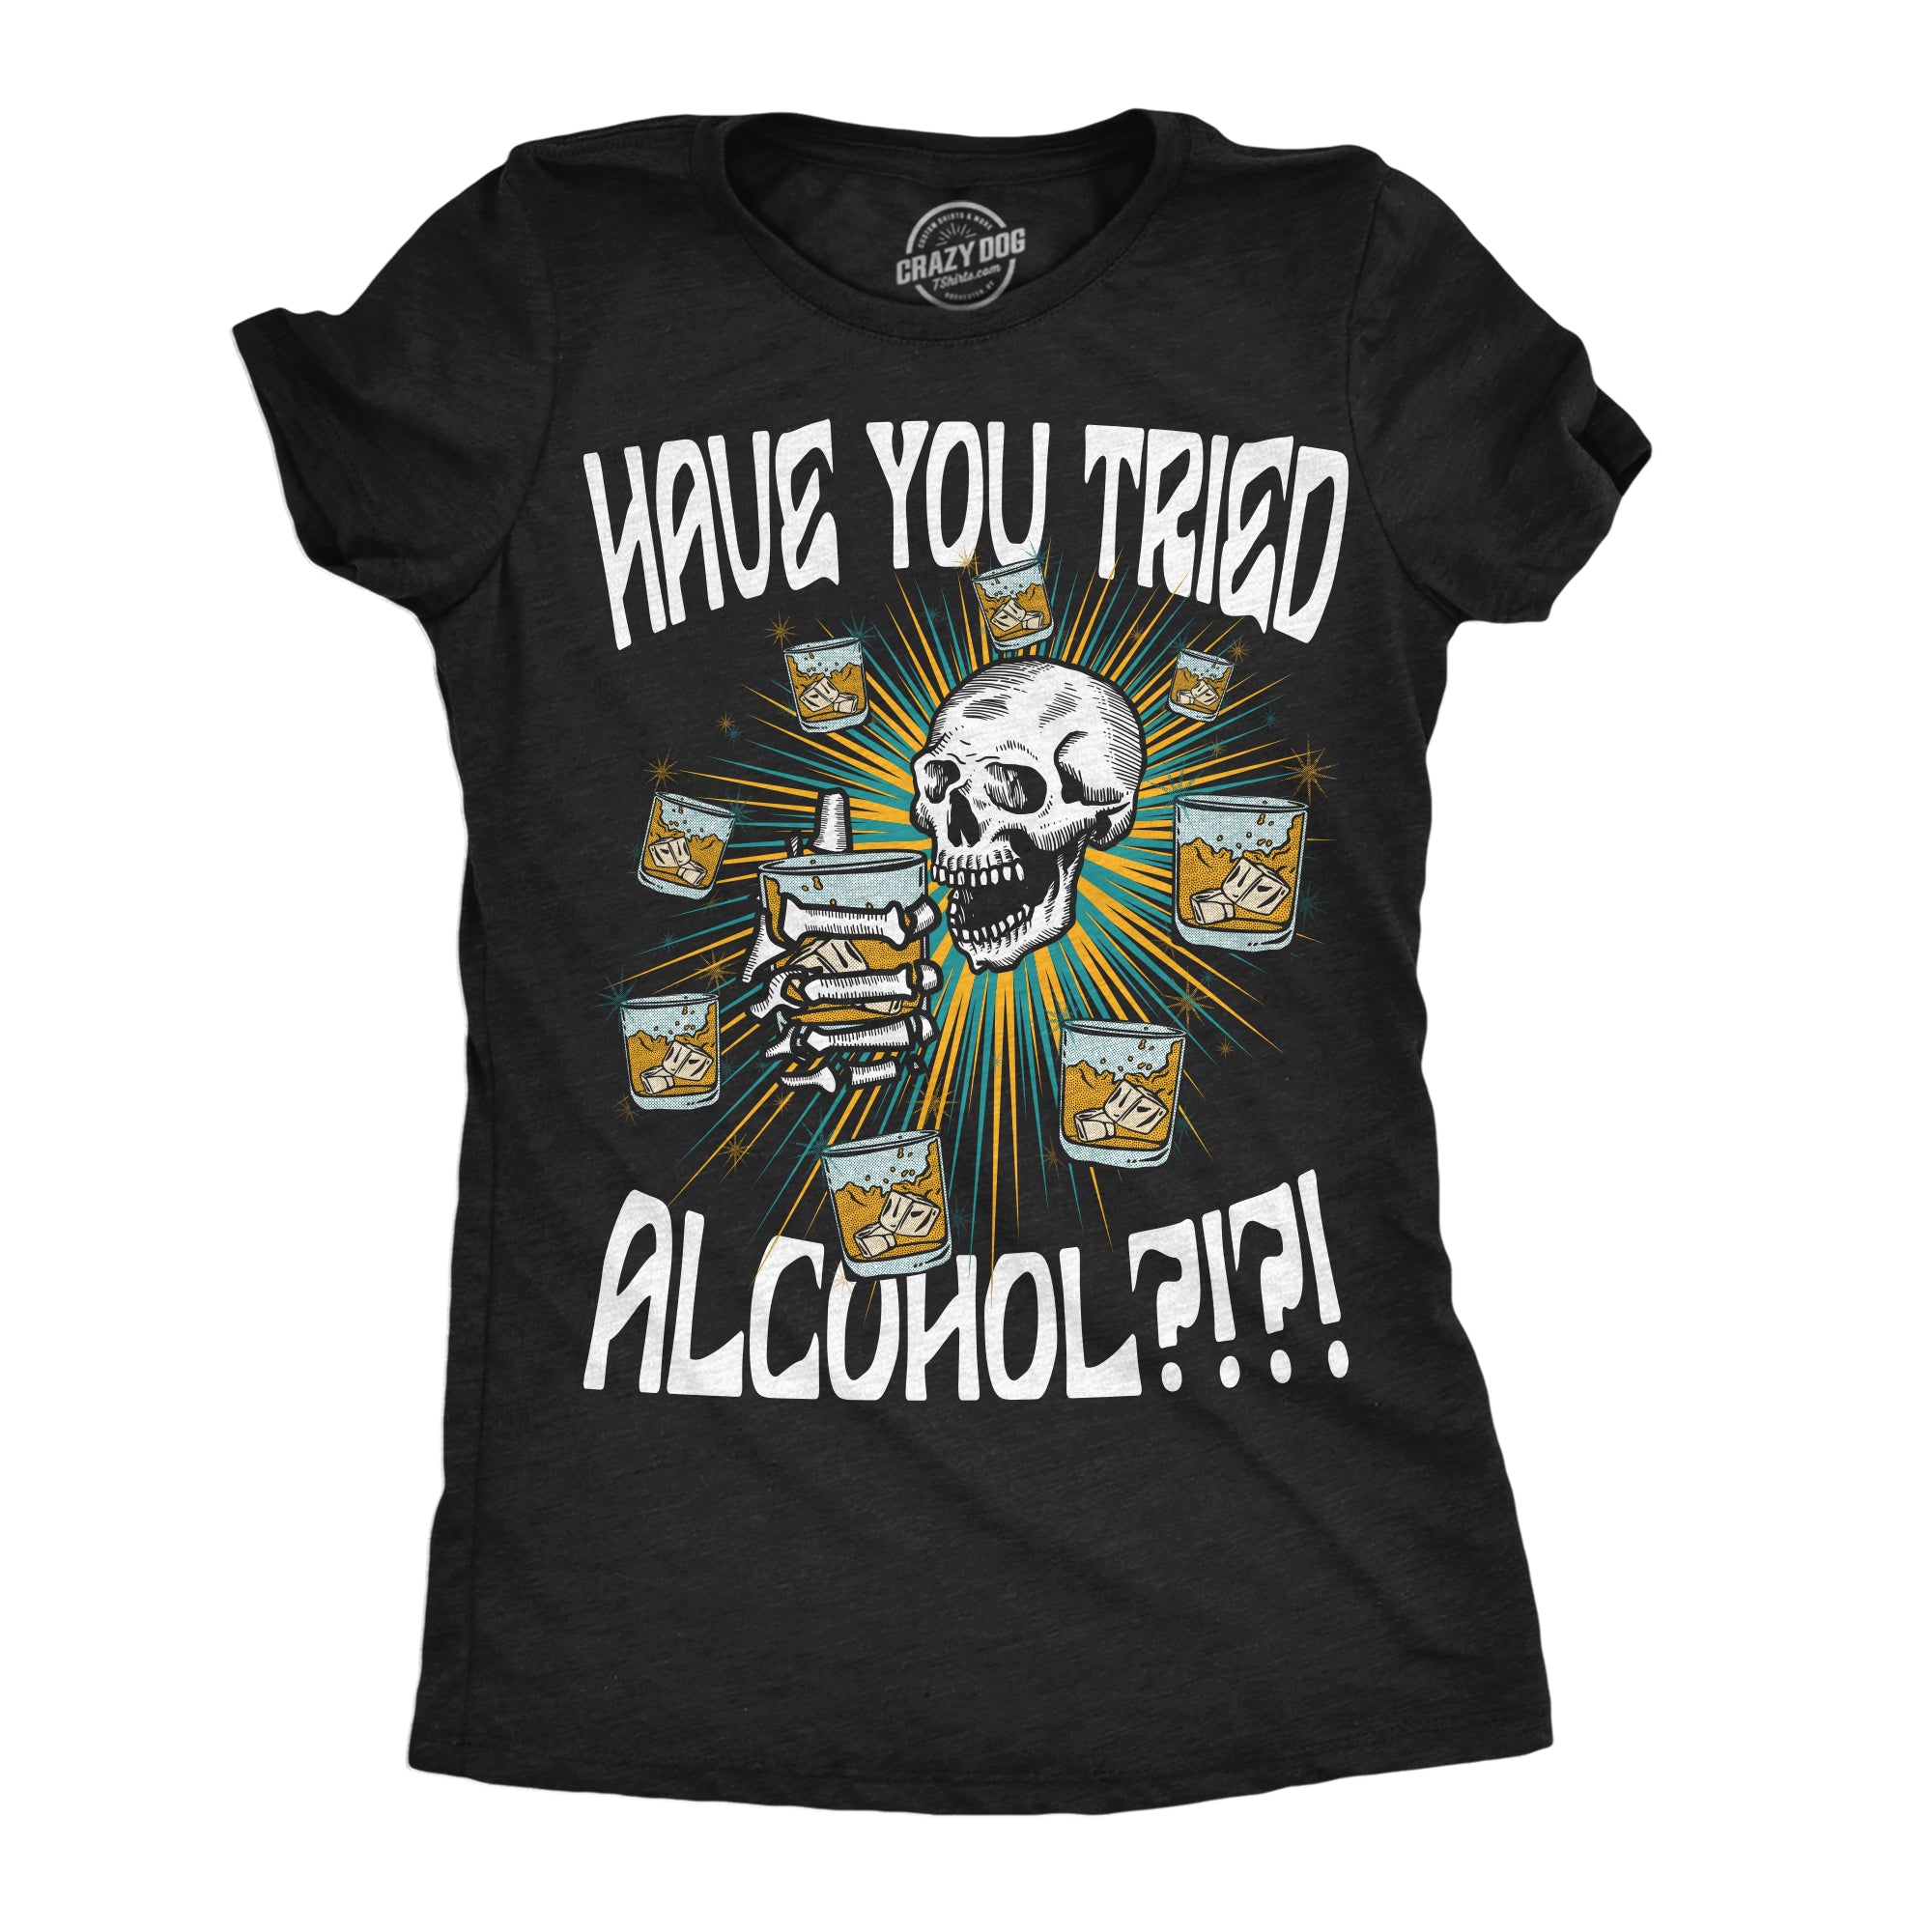 Funny Heather Black - Have You Tried Alcohol Have You Tried Alcohol Womens T Shirt Nerdy Drinking Sarcastic Tee